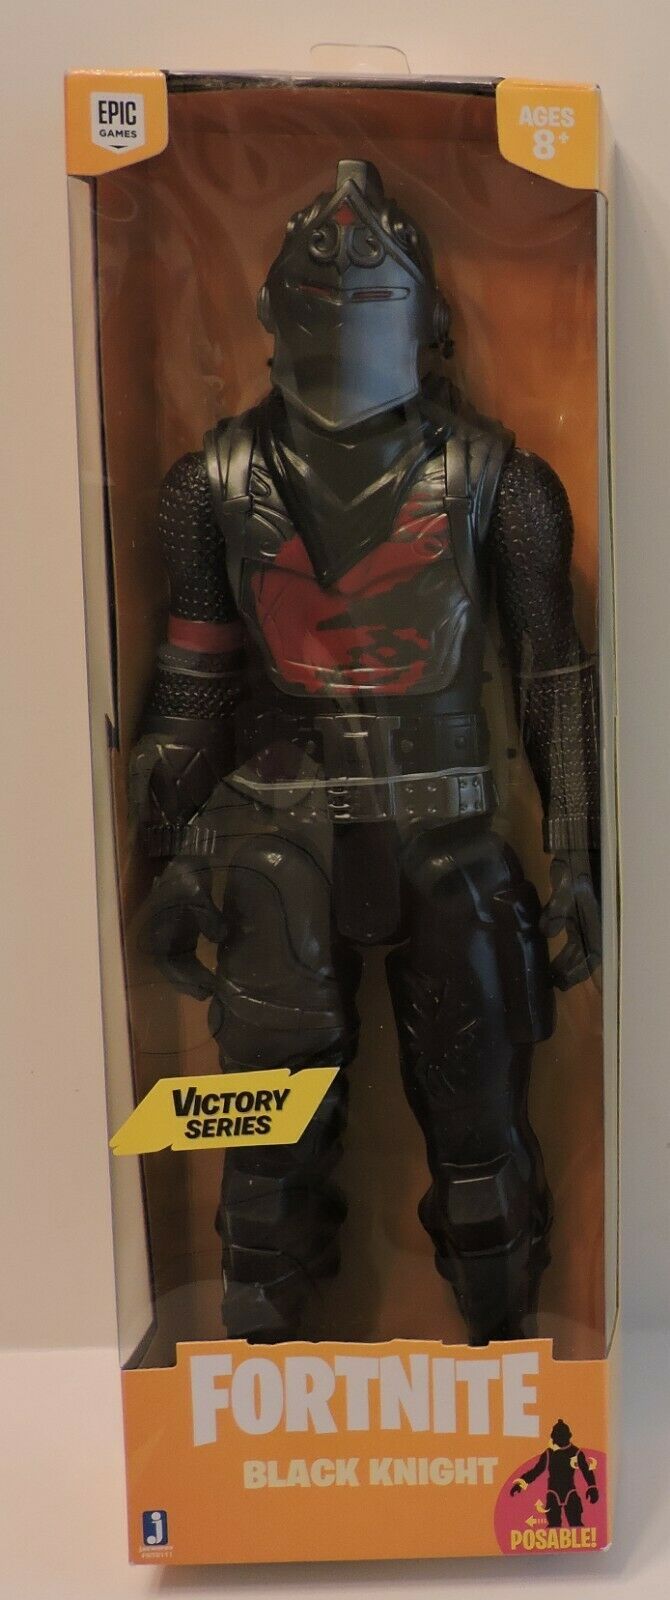 2019 Fortnite Black Knight Victory Series Posable 12 Collectible Action Figure Action Figures